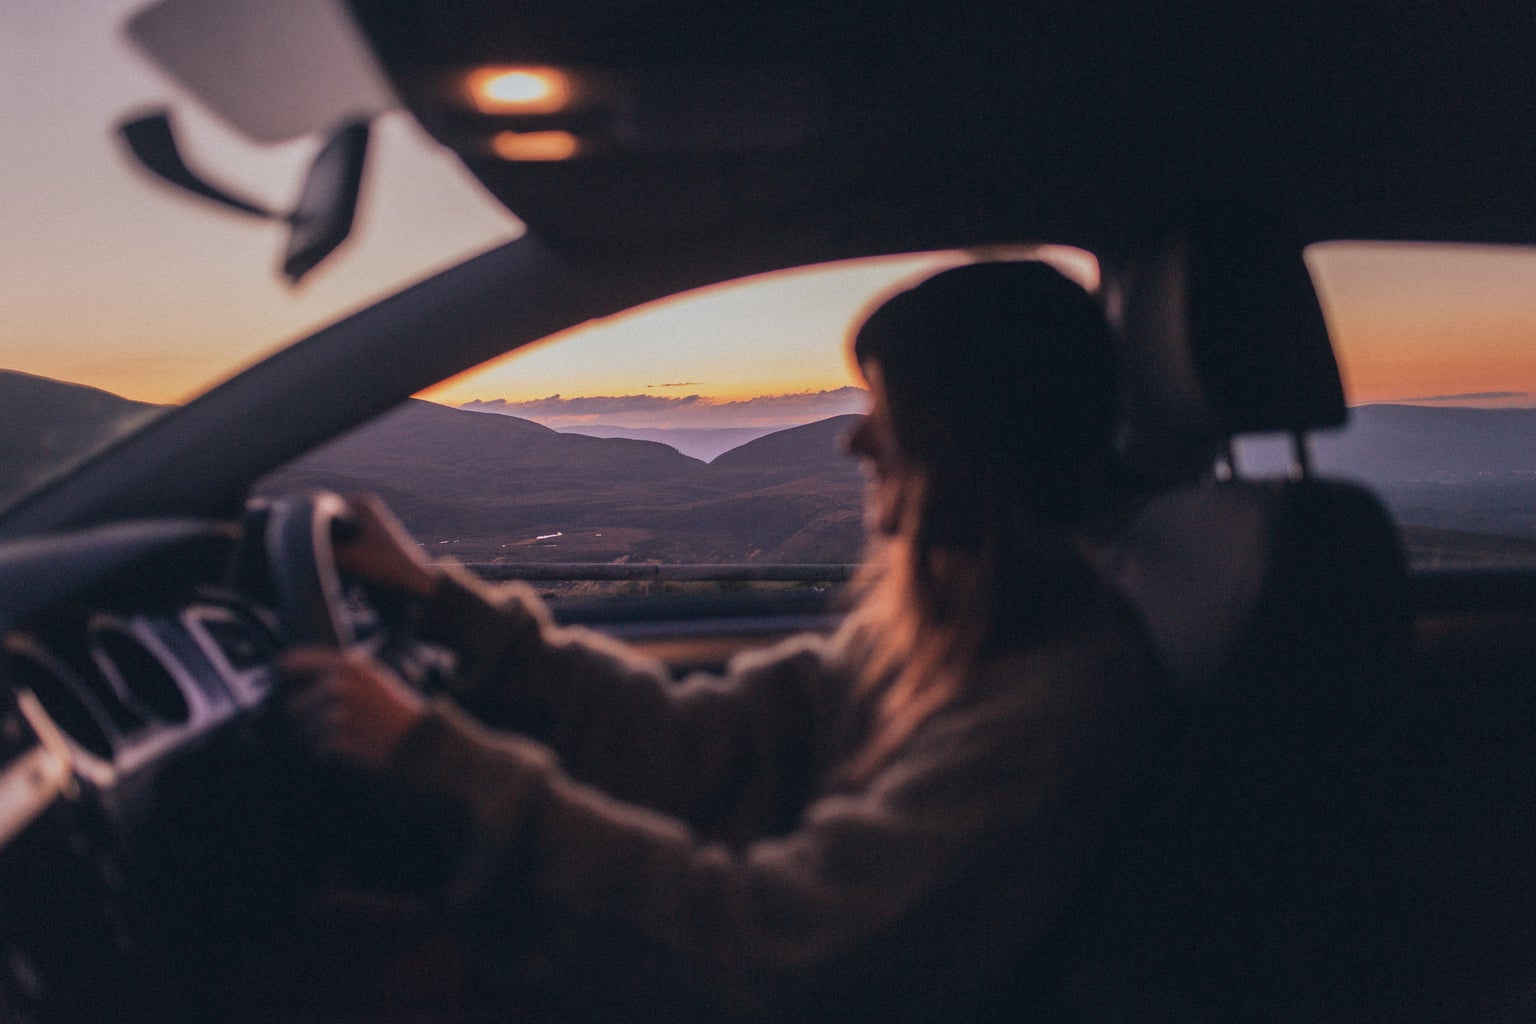 A blurry woman smiles while driving.